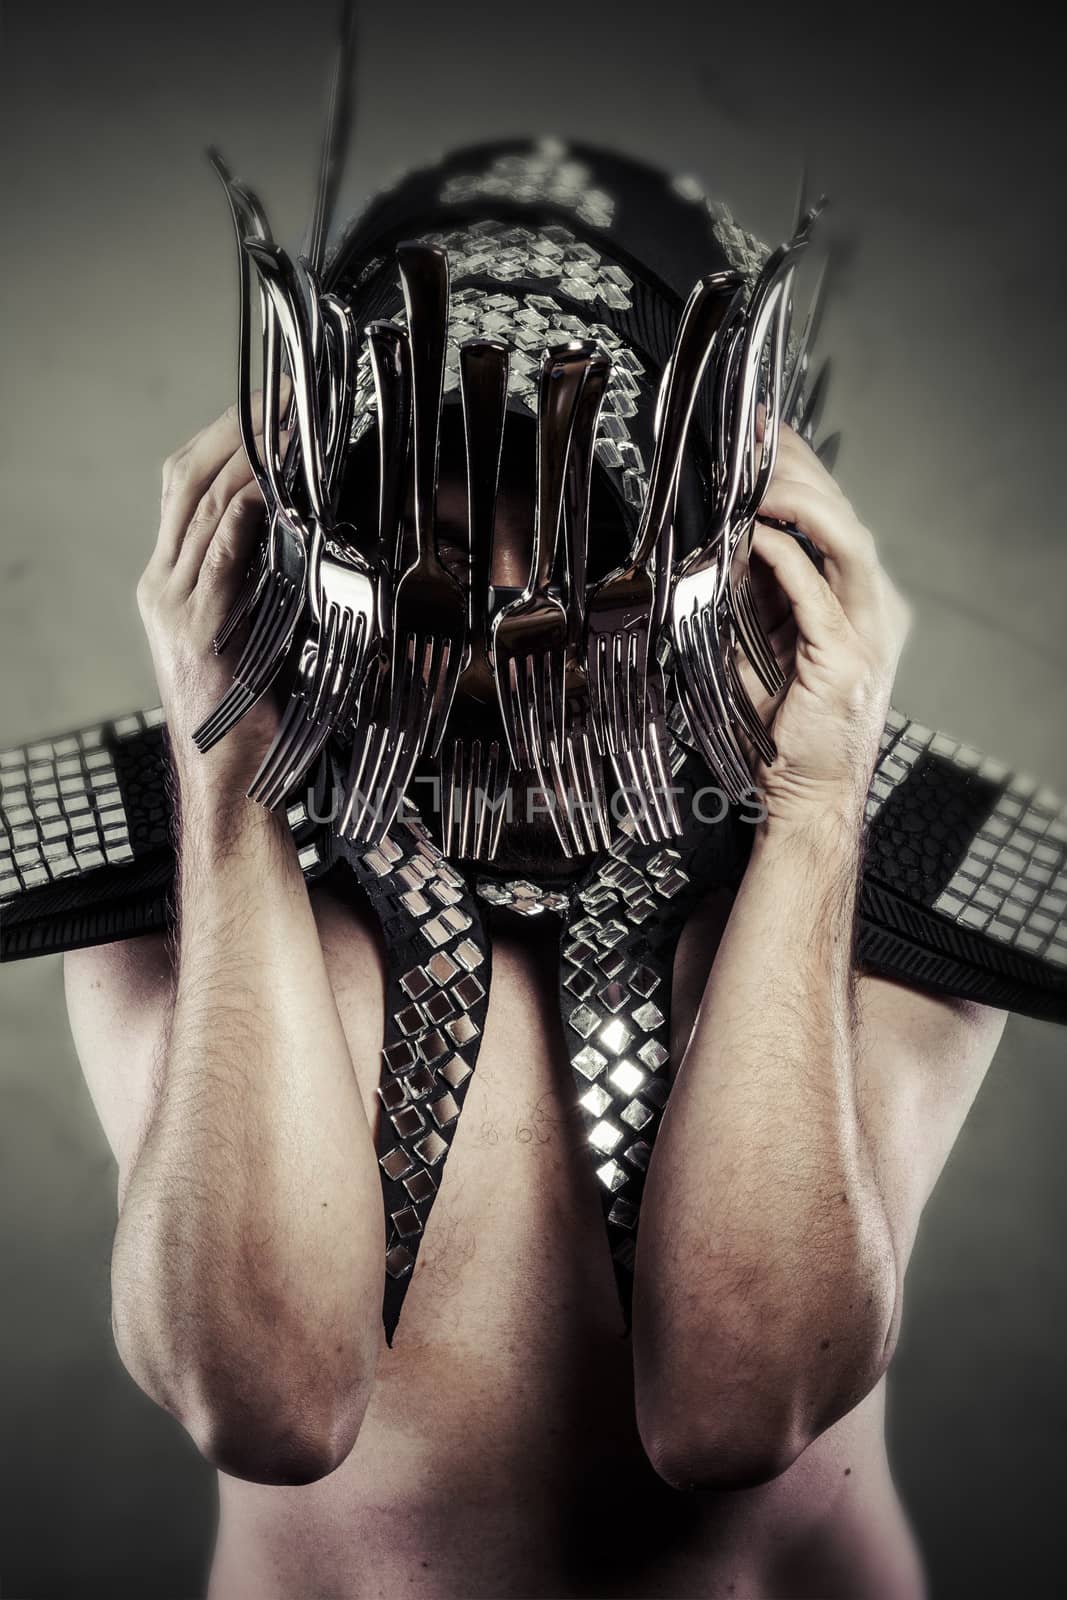 Man with helmet made ������with forks and knives, artistic concept